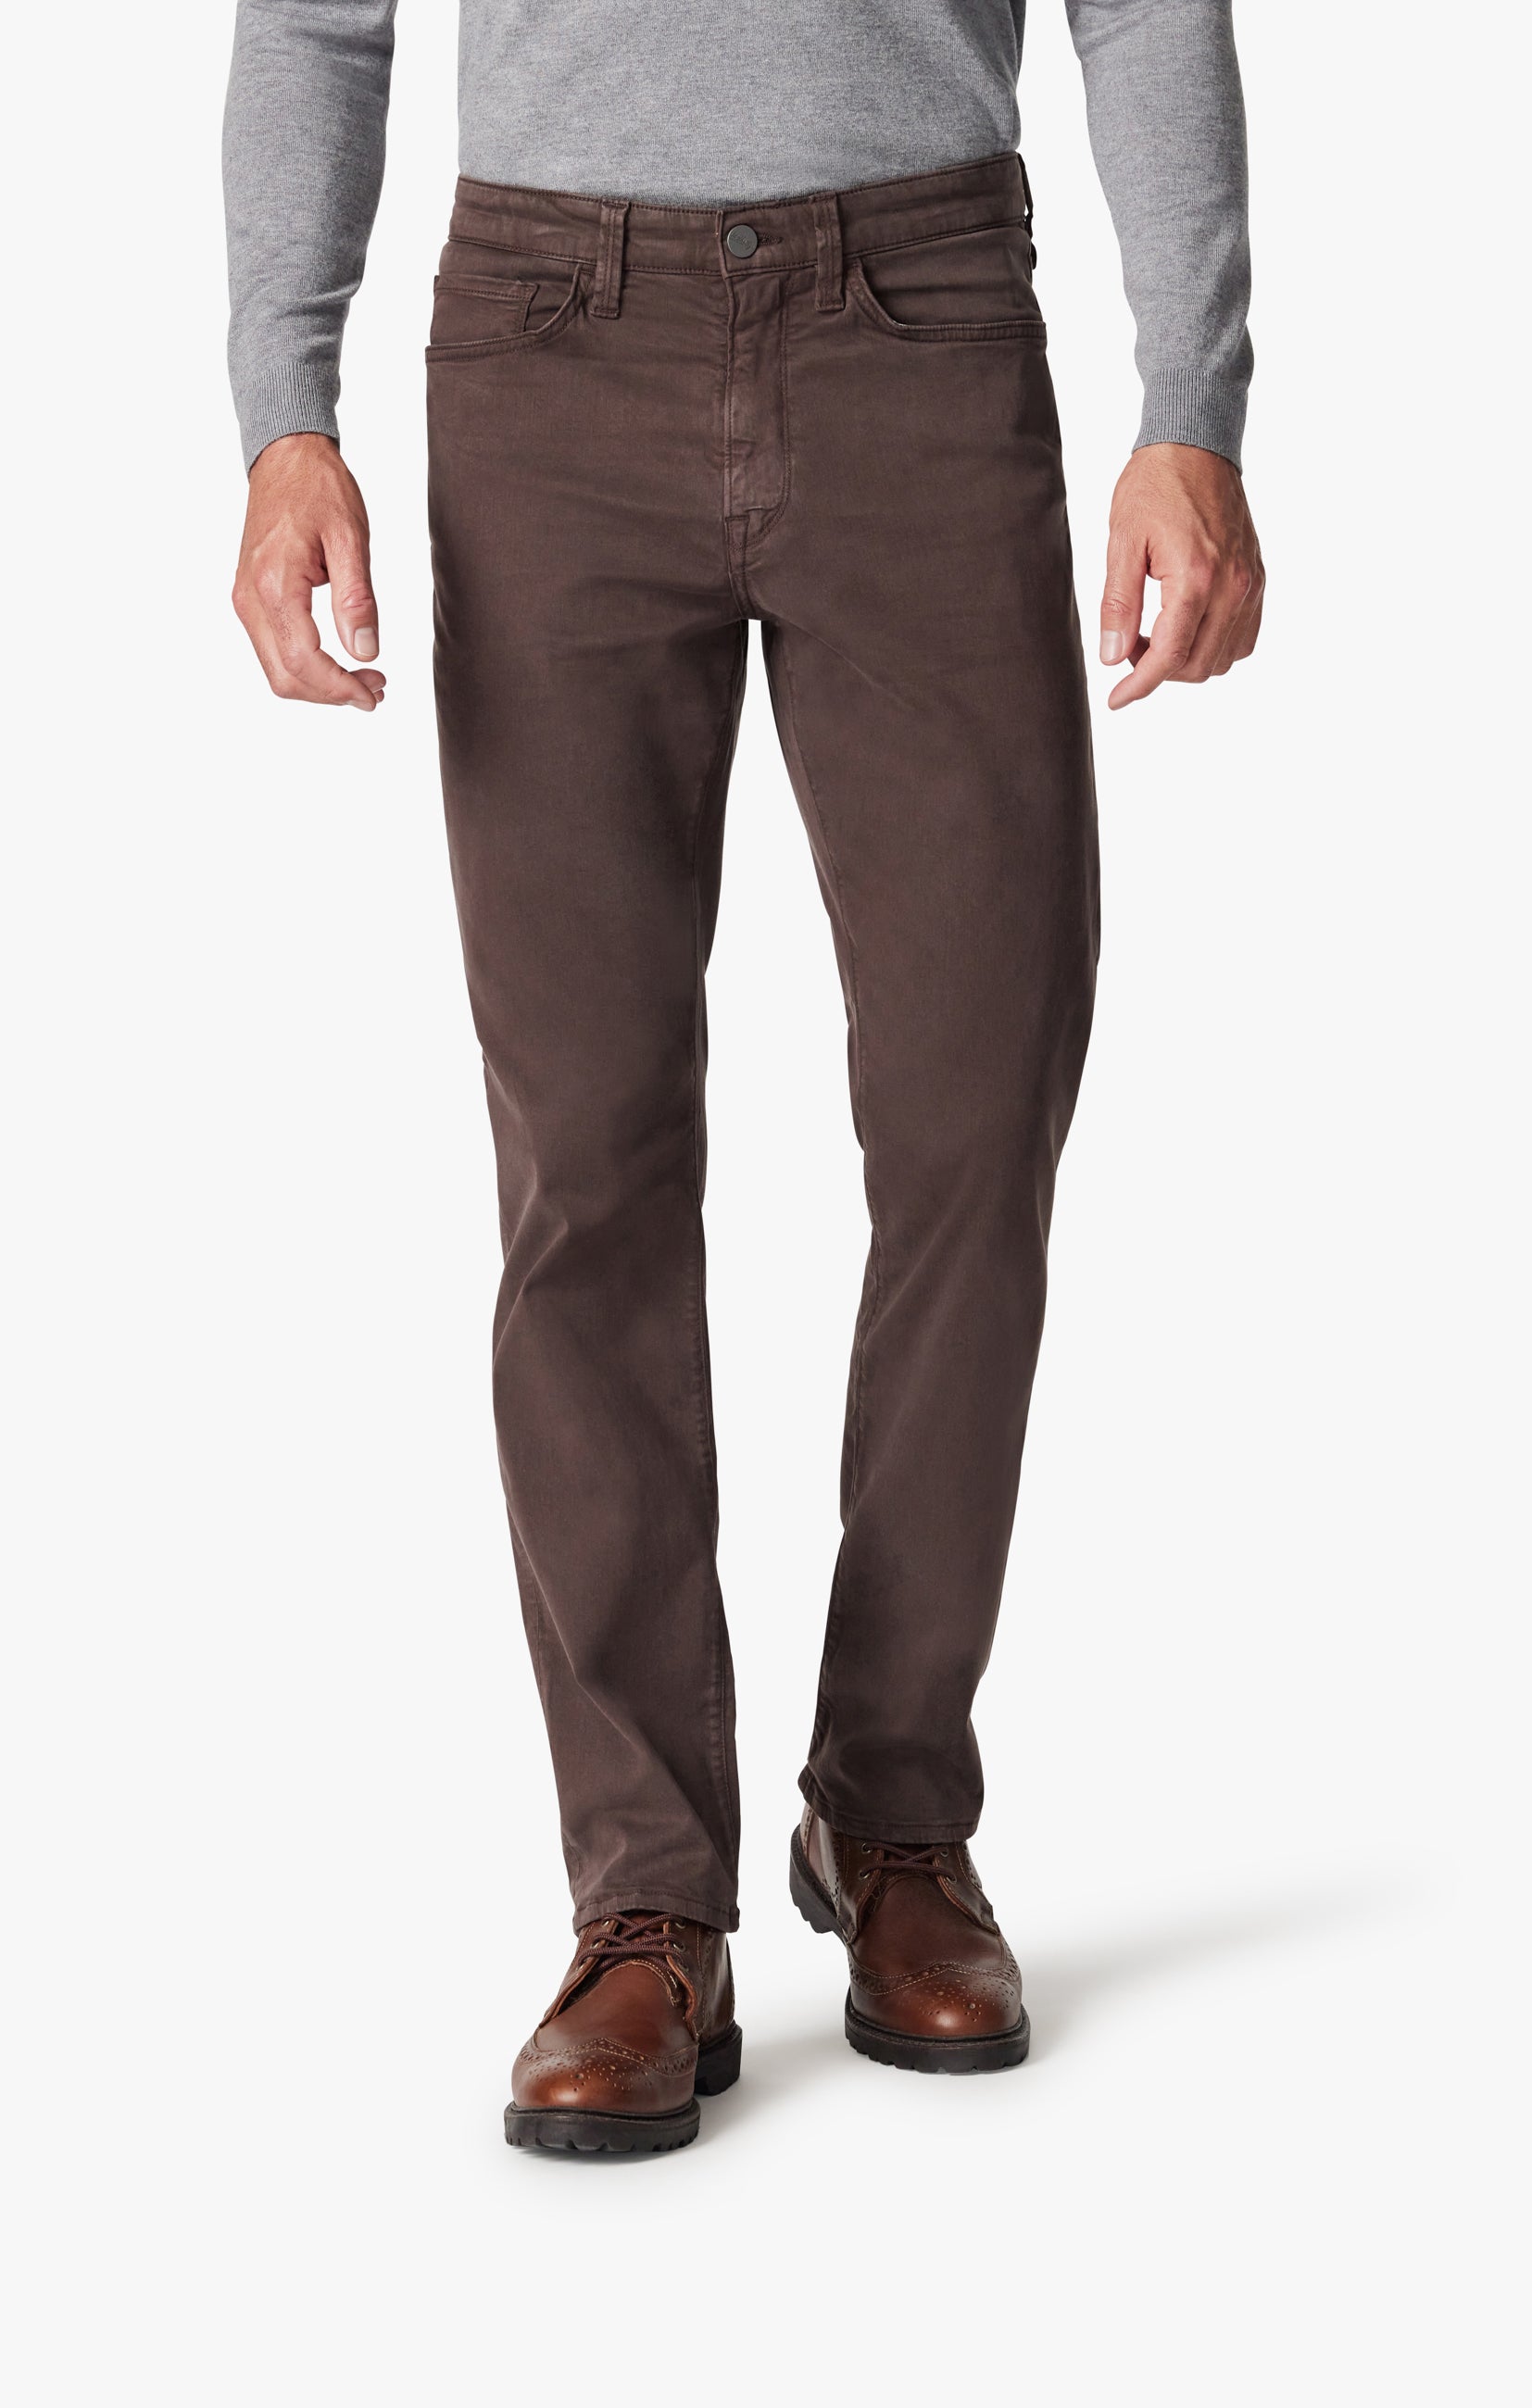 Charisma Relaxed Straight Leg Pants In Fudge Twill Image 2